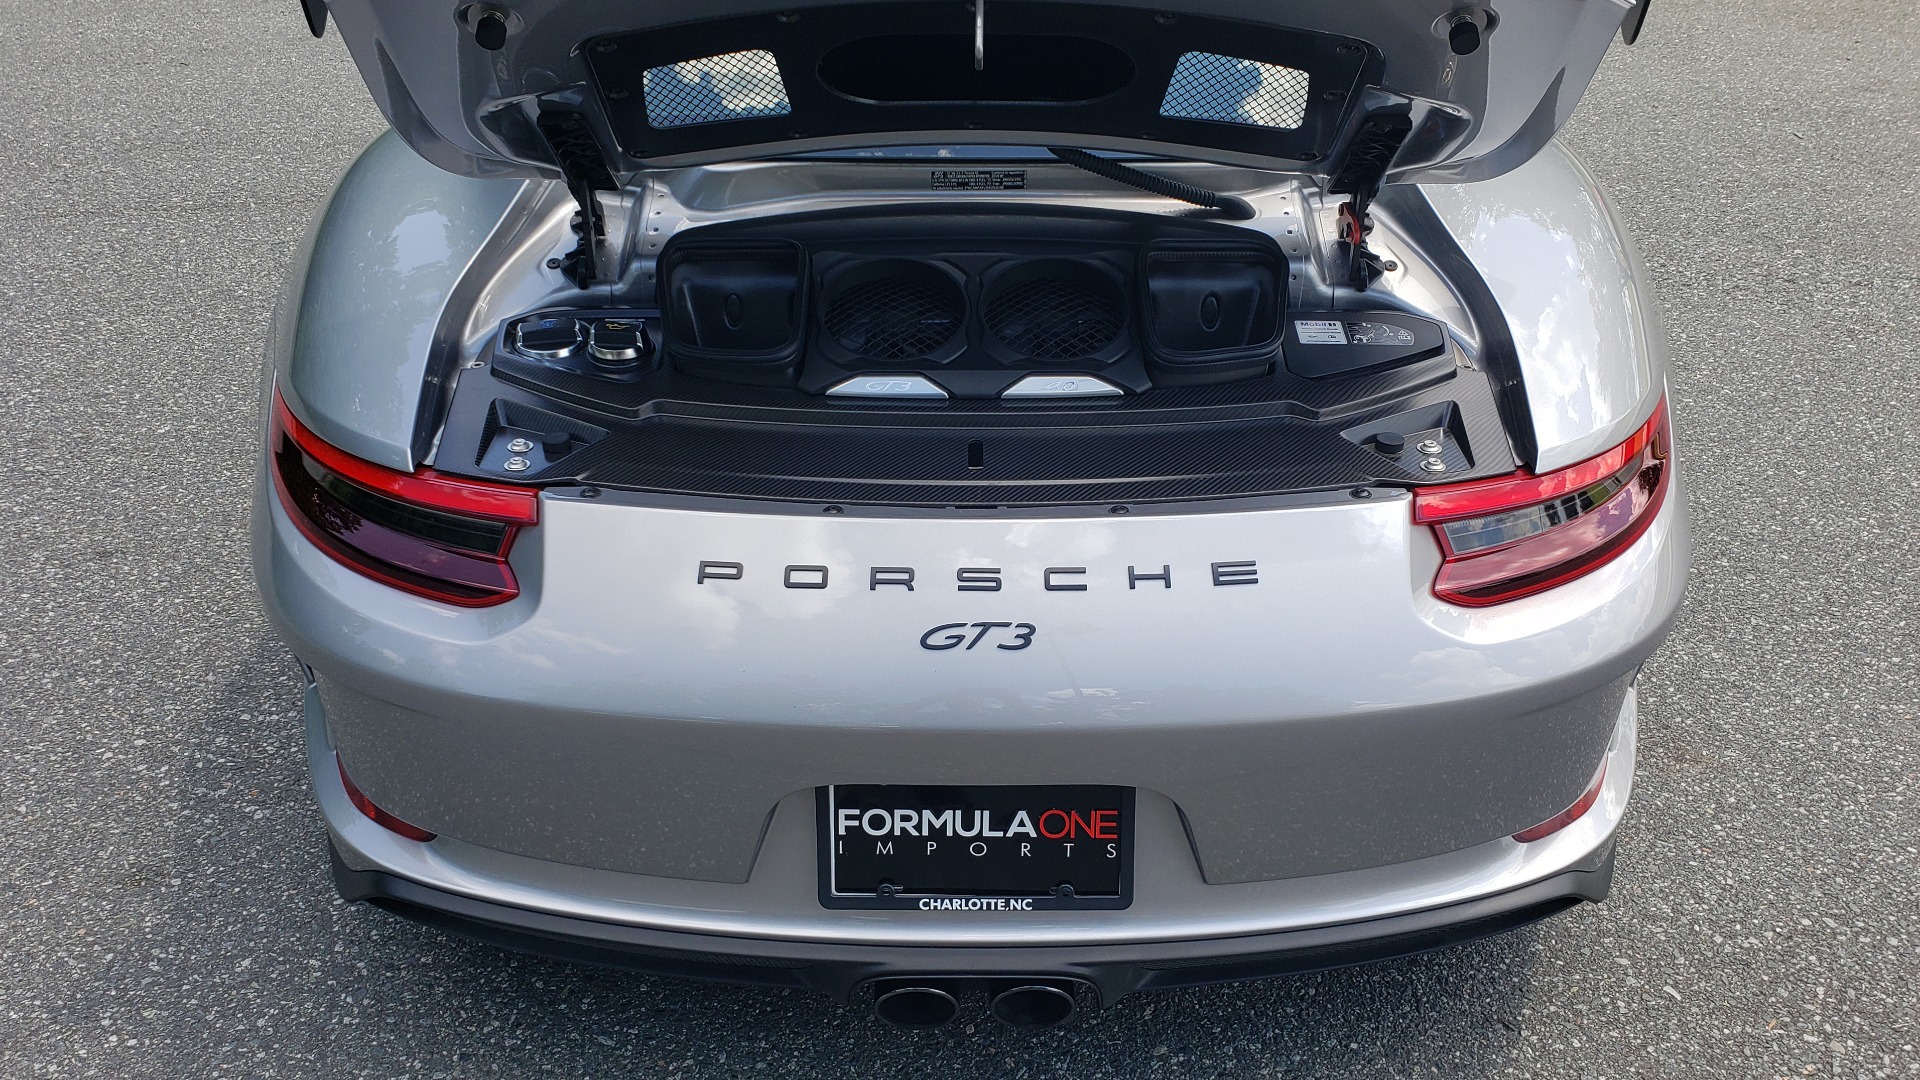 Used 2018 Porsche 911 GT3 4.0L 500HP / 6-SPD MNL / NAV / REARVIEW / PCCB for sale Sold at Formula Imports in Charlotte NC 28227 21